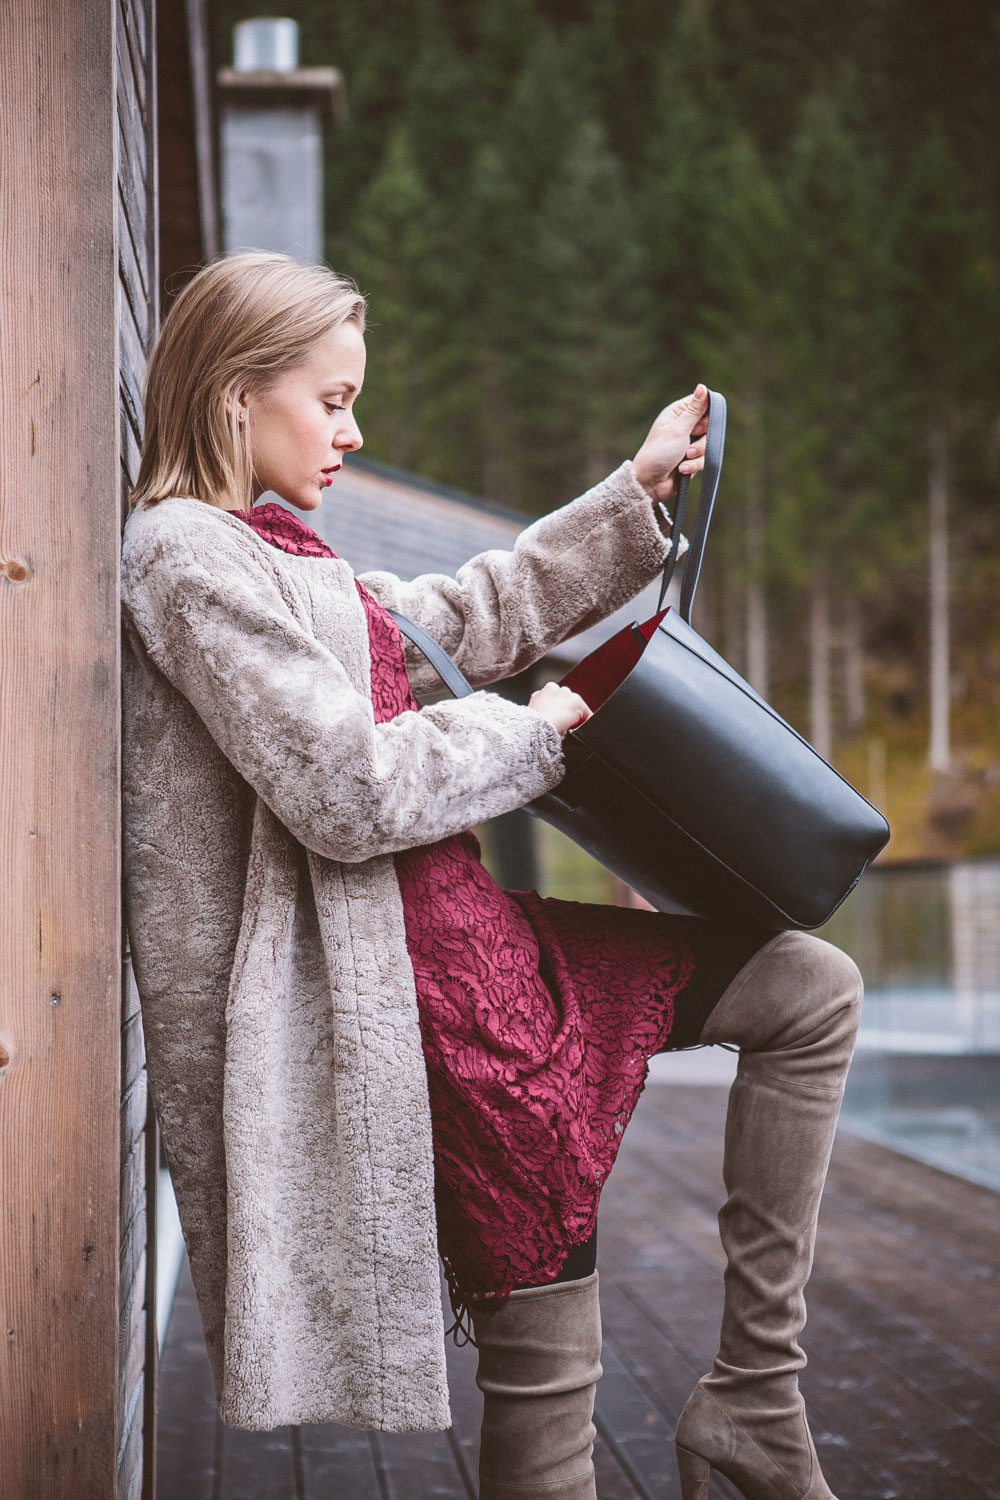 darya-kamalova-thecablook-fashion-lifestyle-blogger-from-thecablook-com-wearing-theoutnet-iris-ink-wine-lace-dress-with-coat-and-bag-and-stuart-weitzman-over-knee-boots-in-austria-zhero-hotel-kappl-president-suite-8593